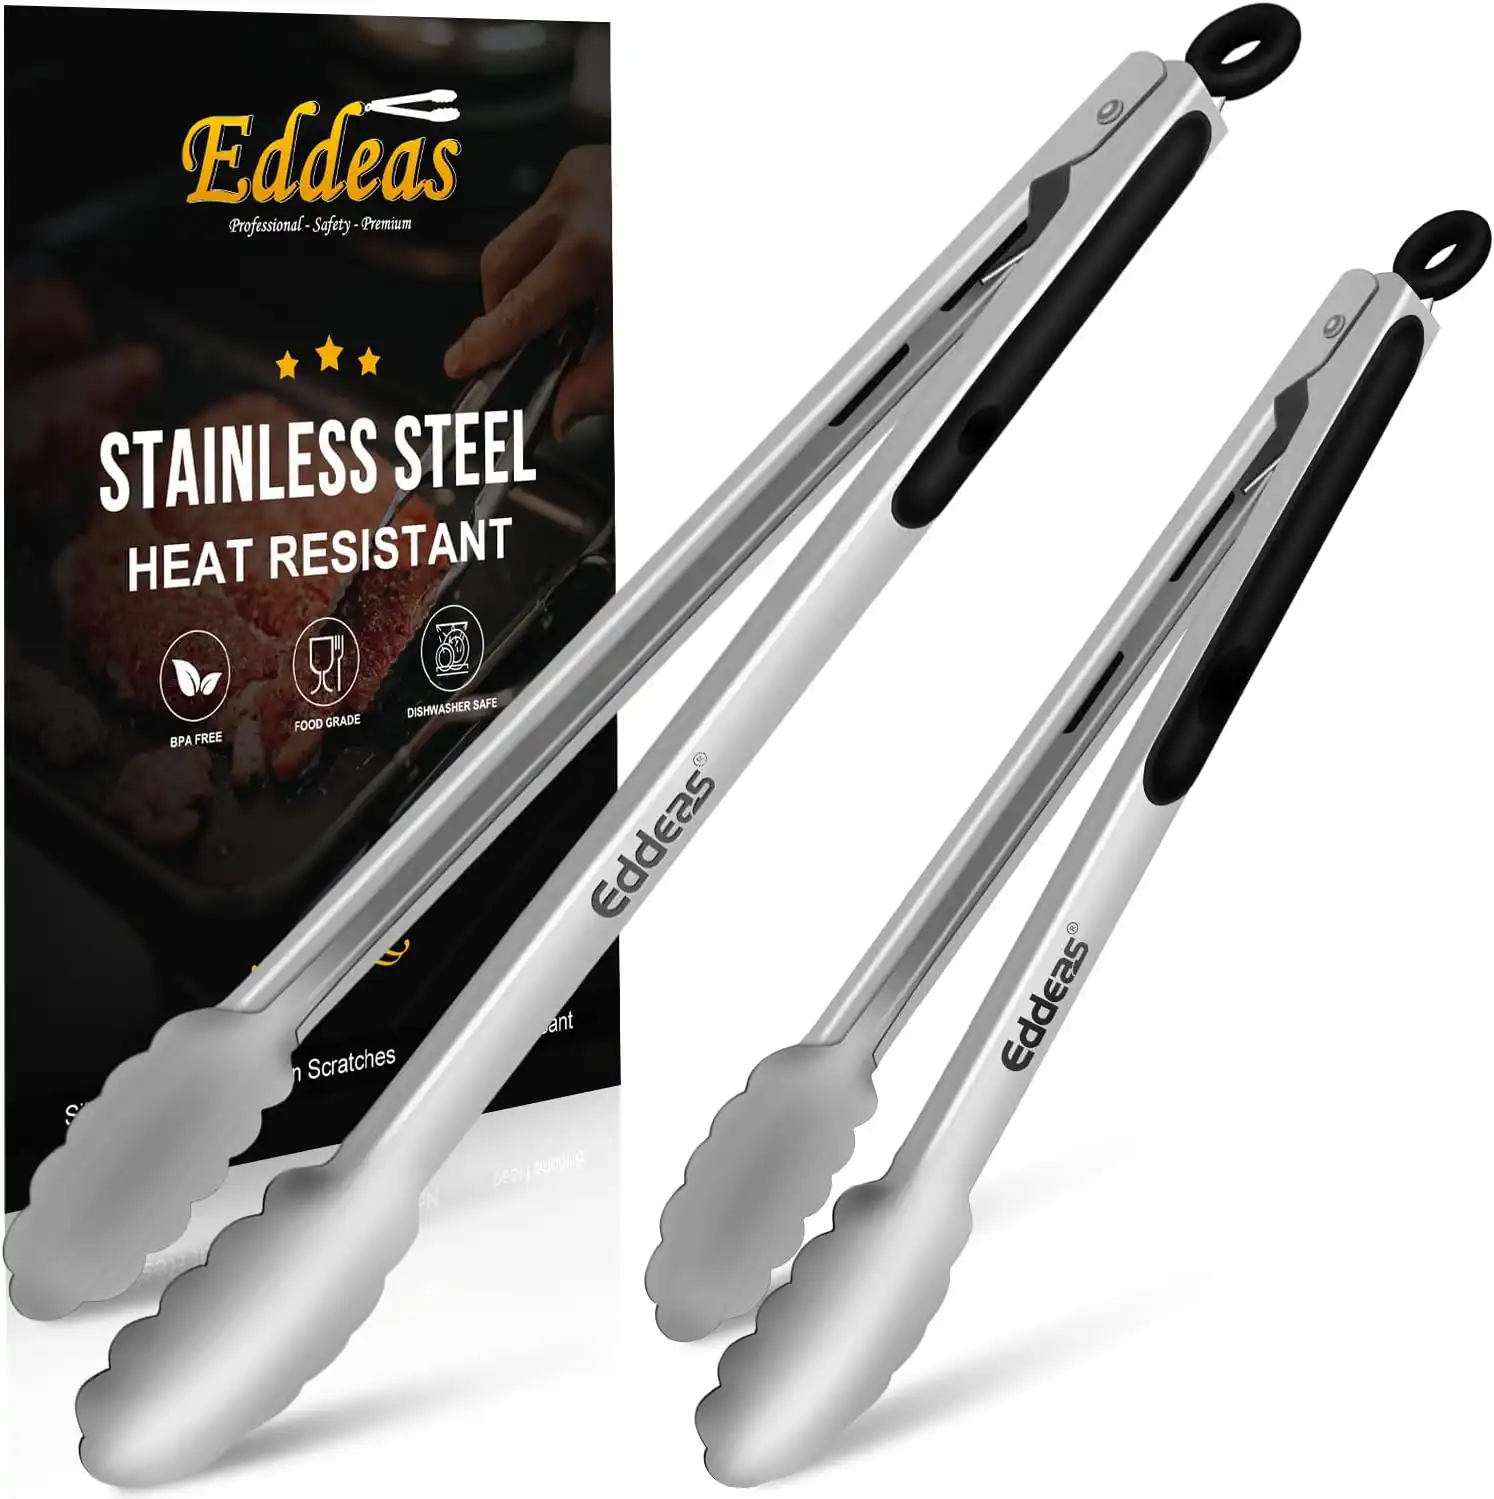 Amazon: Eddeas Grill Tongs, Bbq tongs - 12" and 17 Inch Extra Long Kitchen Tongs